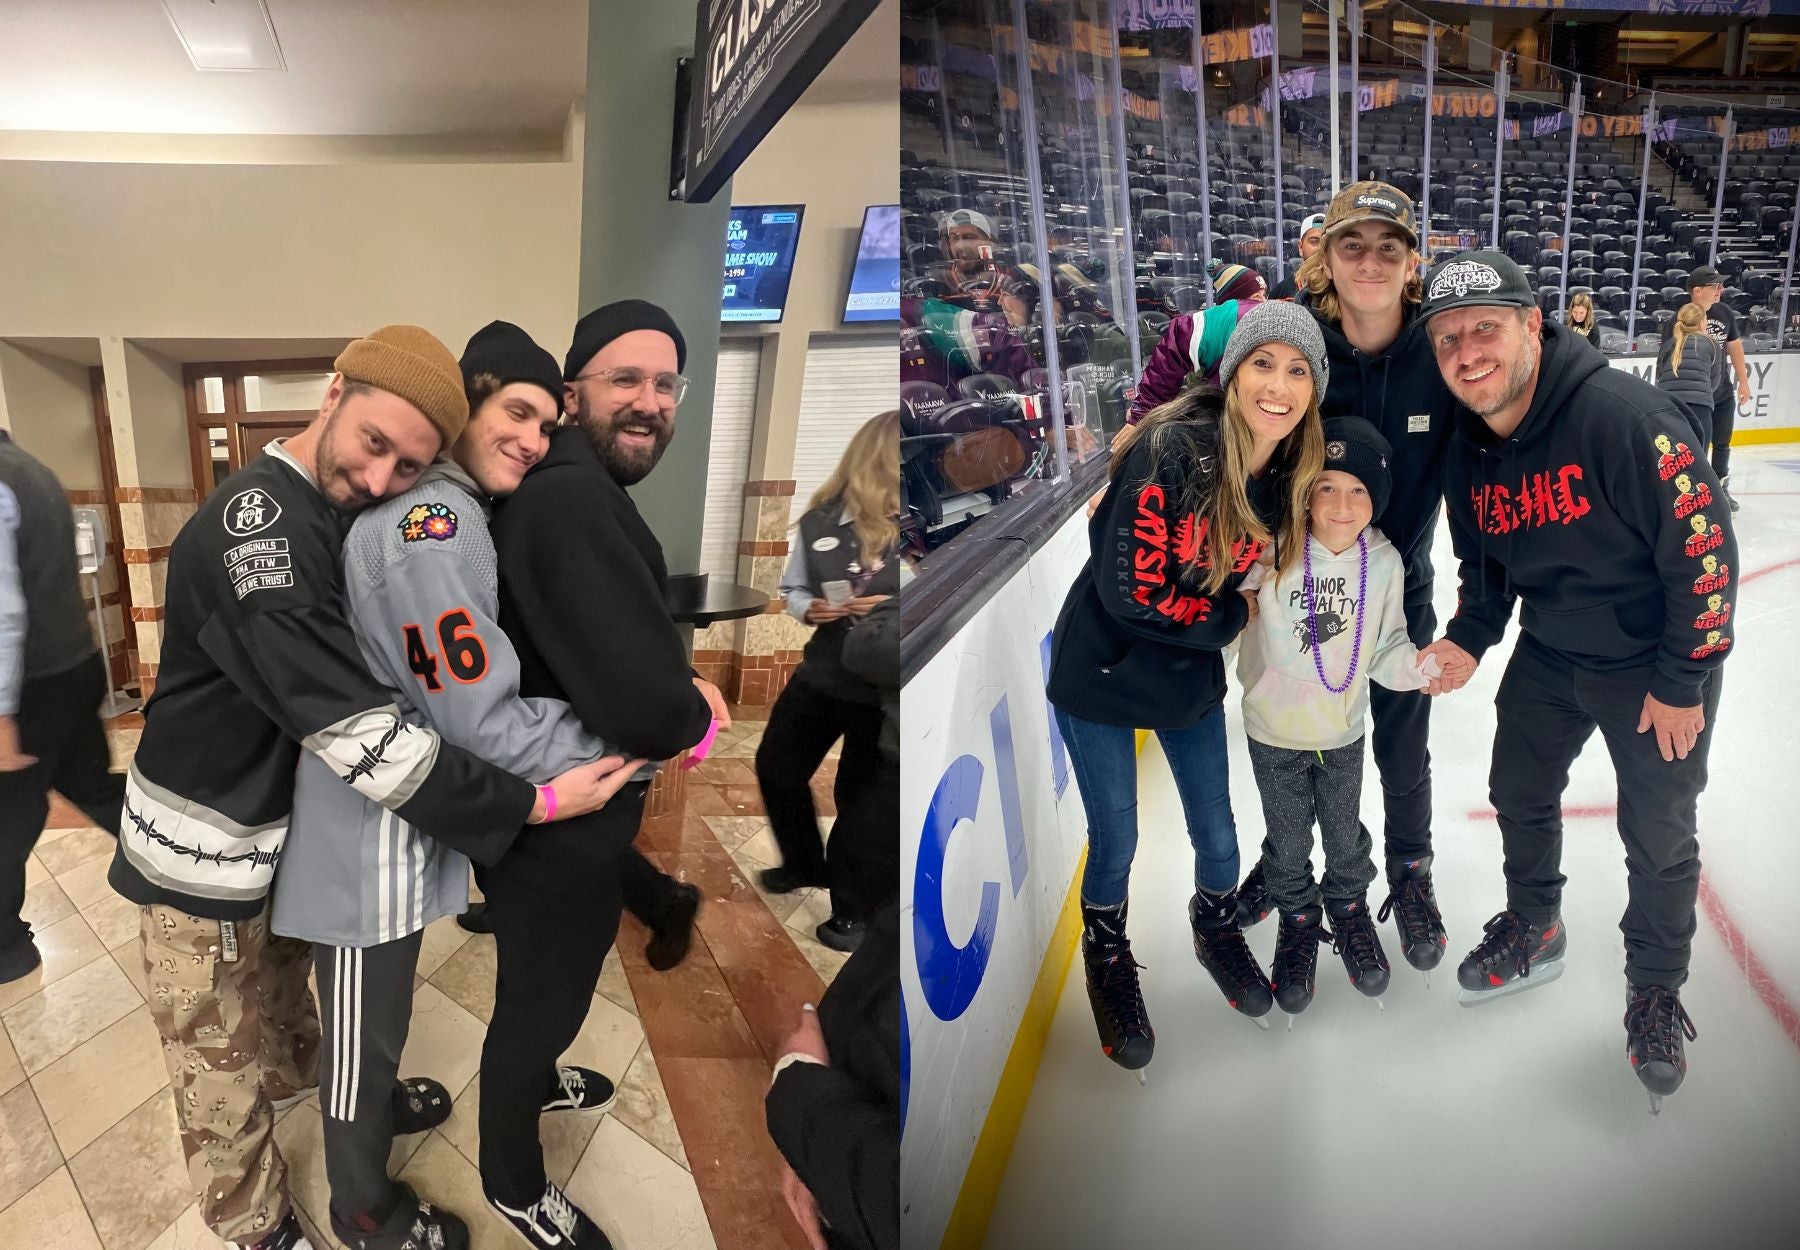 Orquest aedelweiss Hockey Clothing Company visits Honda Center, the home of the Anaheim Ducks for a hockey game against the Vegas Golden Knights. Here are some of our favorite memories skating on the ice after the game.